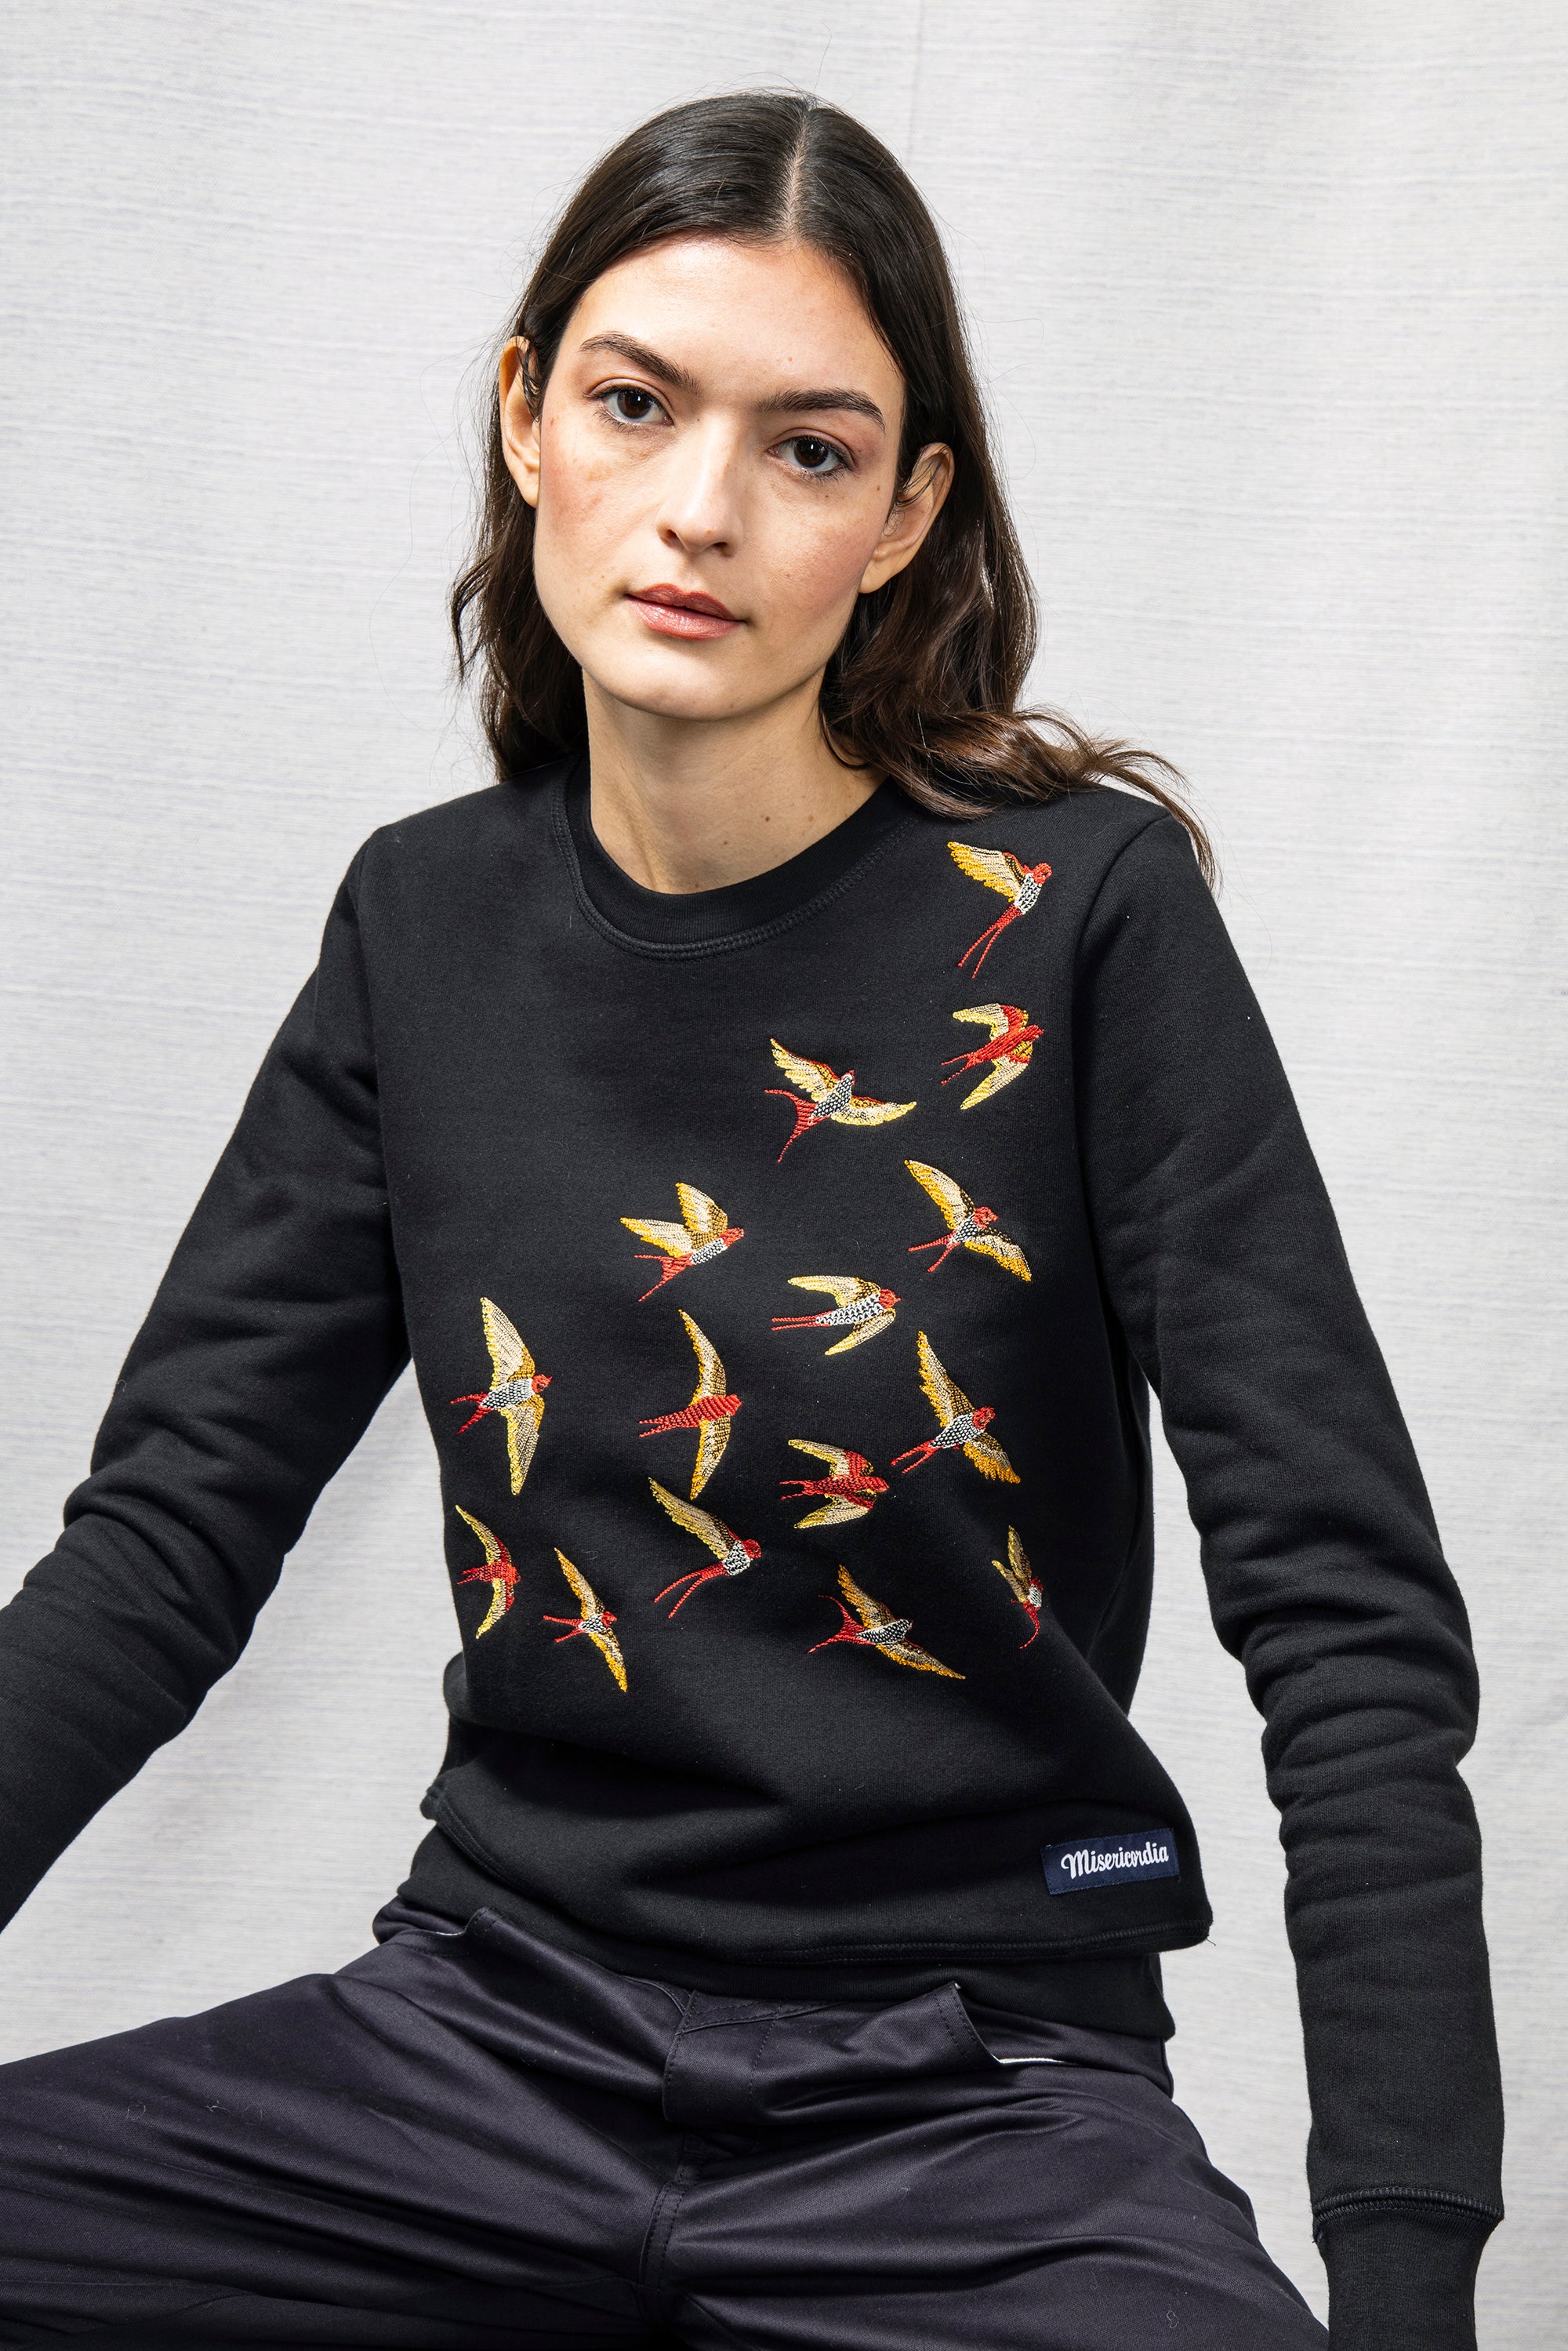 women's cotton sweater embroidered patterns handcrafted yellow and red bird patterns fitted black mid-season sweater women's cotton elegant refined Peruvian cotton